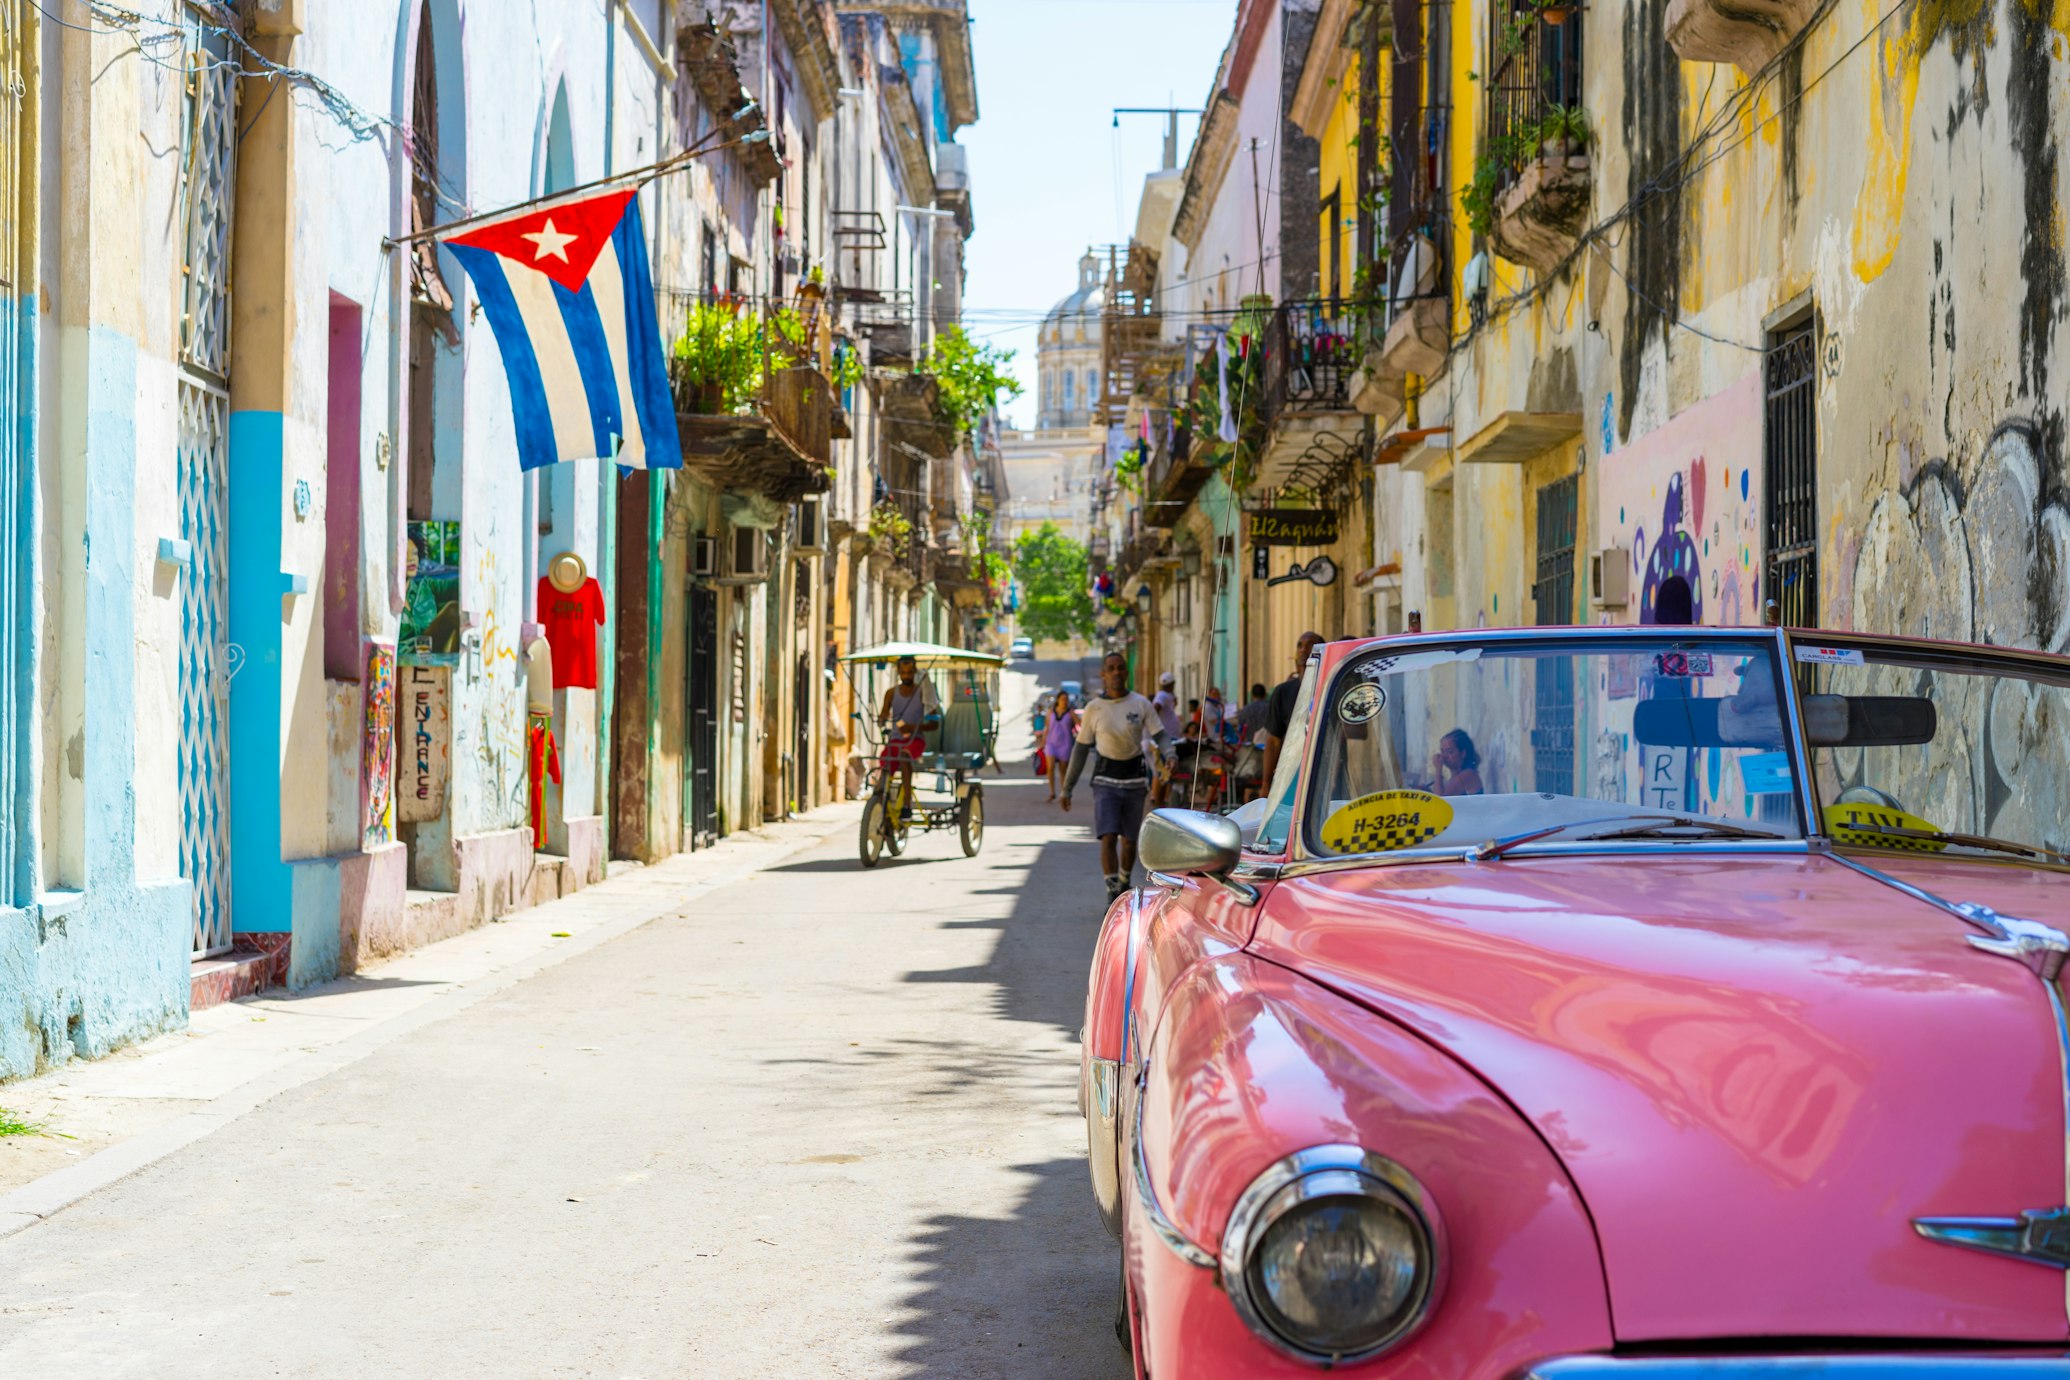 Cuba Travel Guide - Attractions, What to See, Do, Costs, FAQs